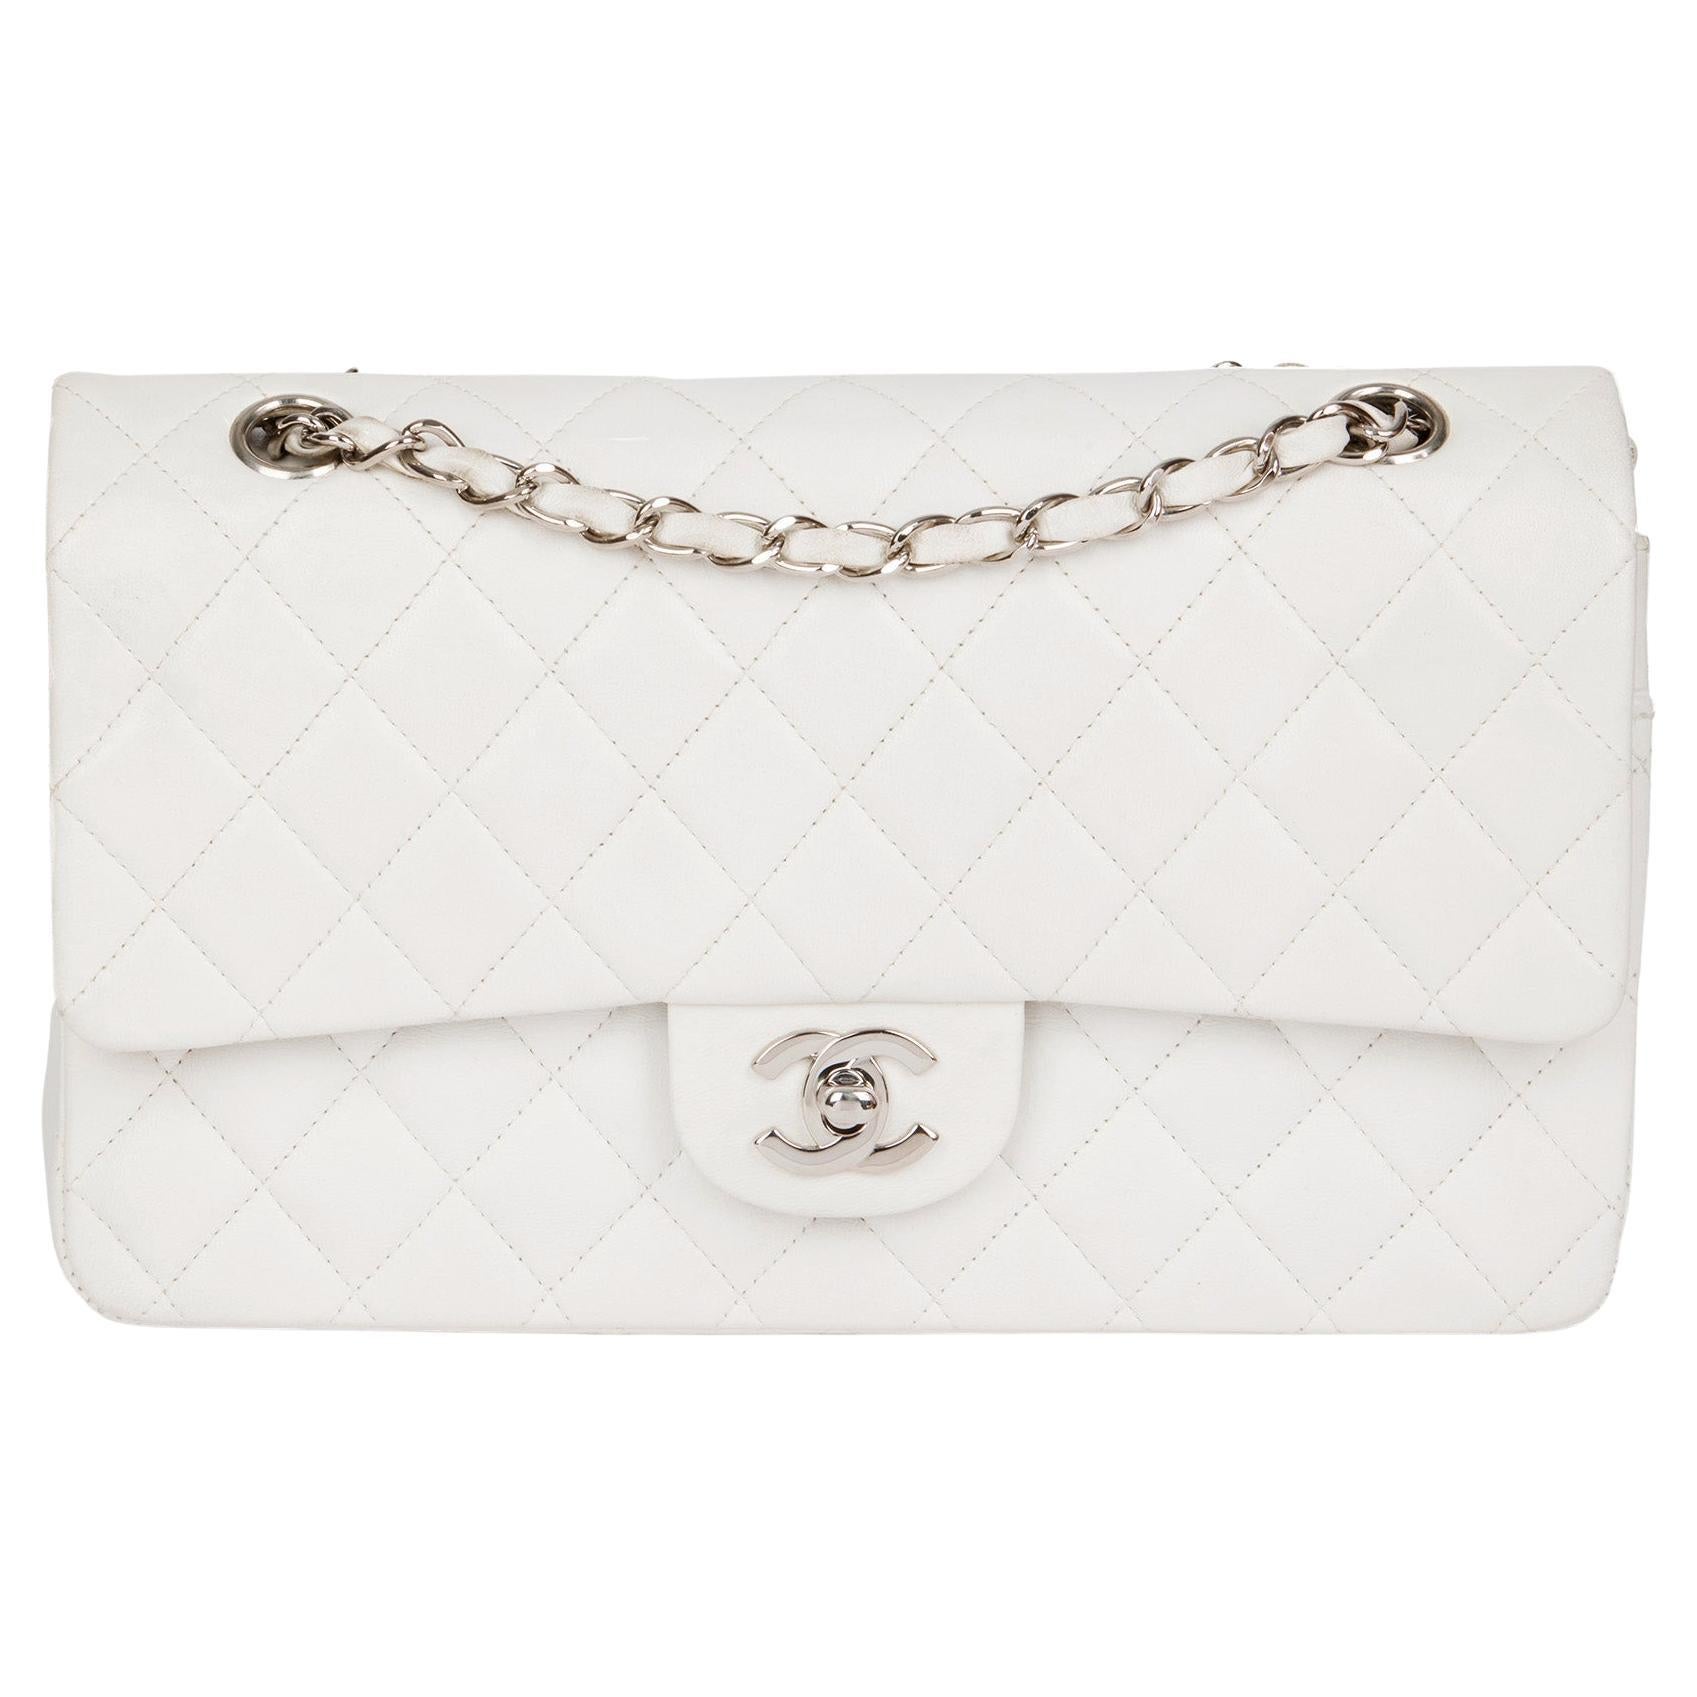 CHANEL White Quilted Lambskin Vintage Medium Classic Double Flap Bag